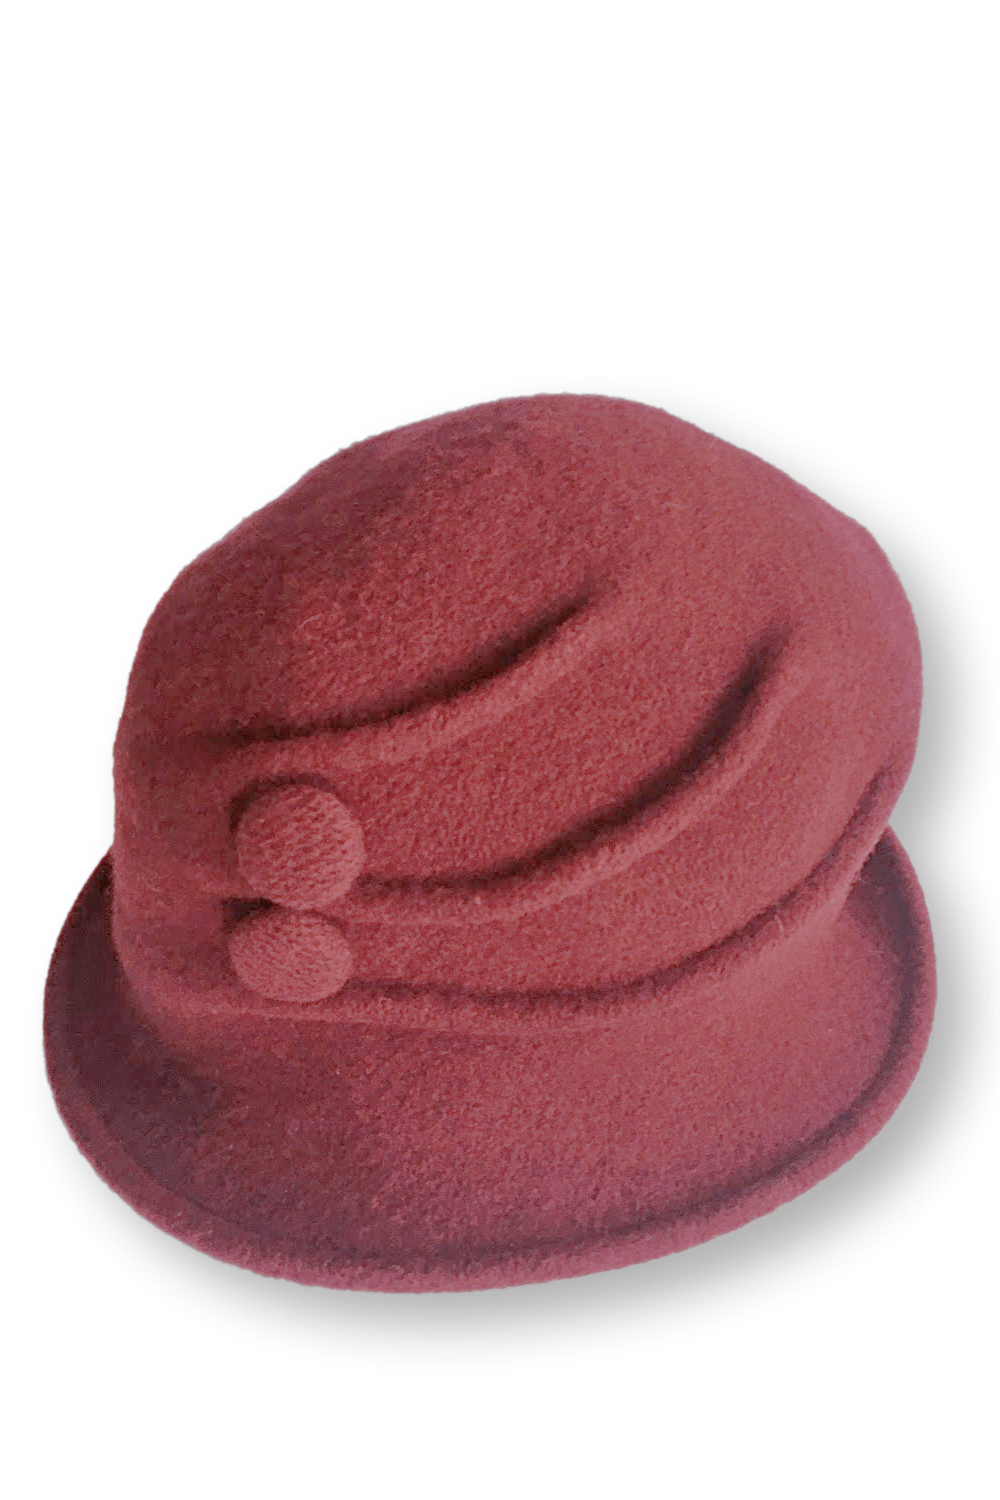 Women's Merino Wool Hat with pleat detail and 2 side buttons. Hat is cranberry color.